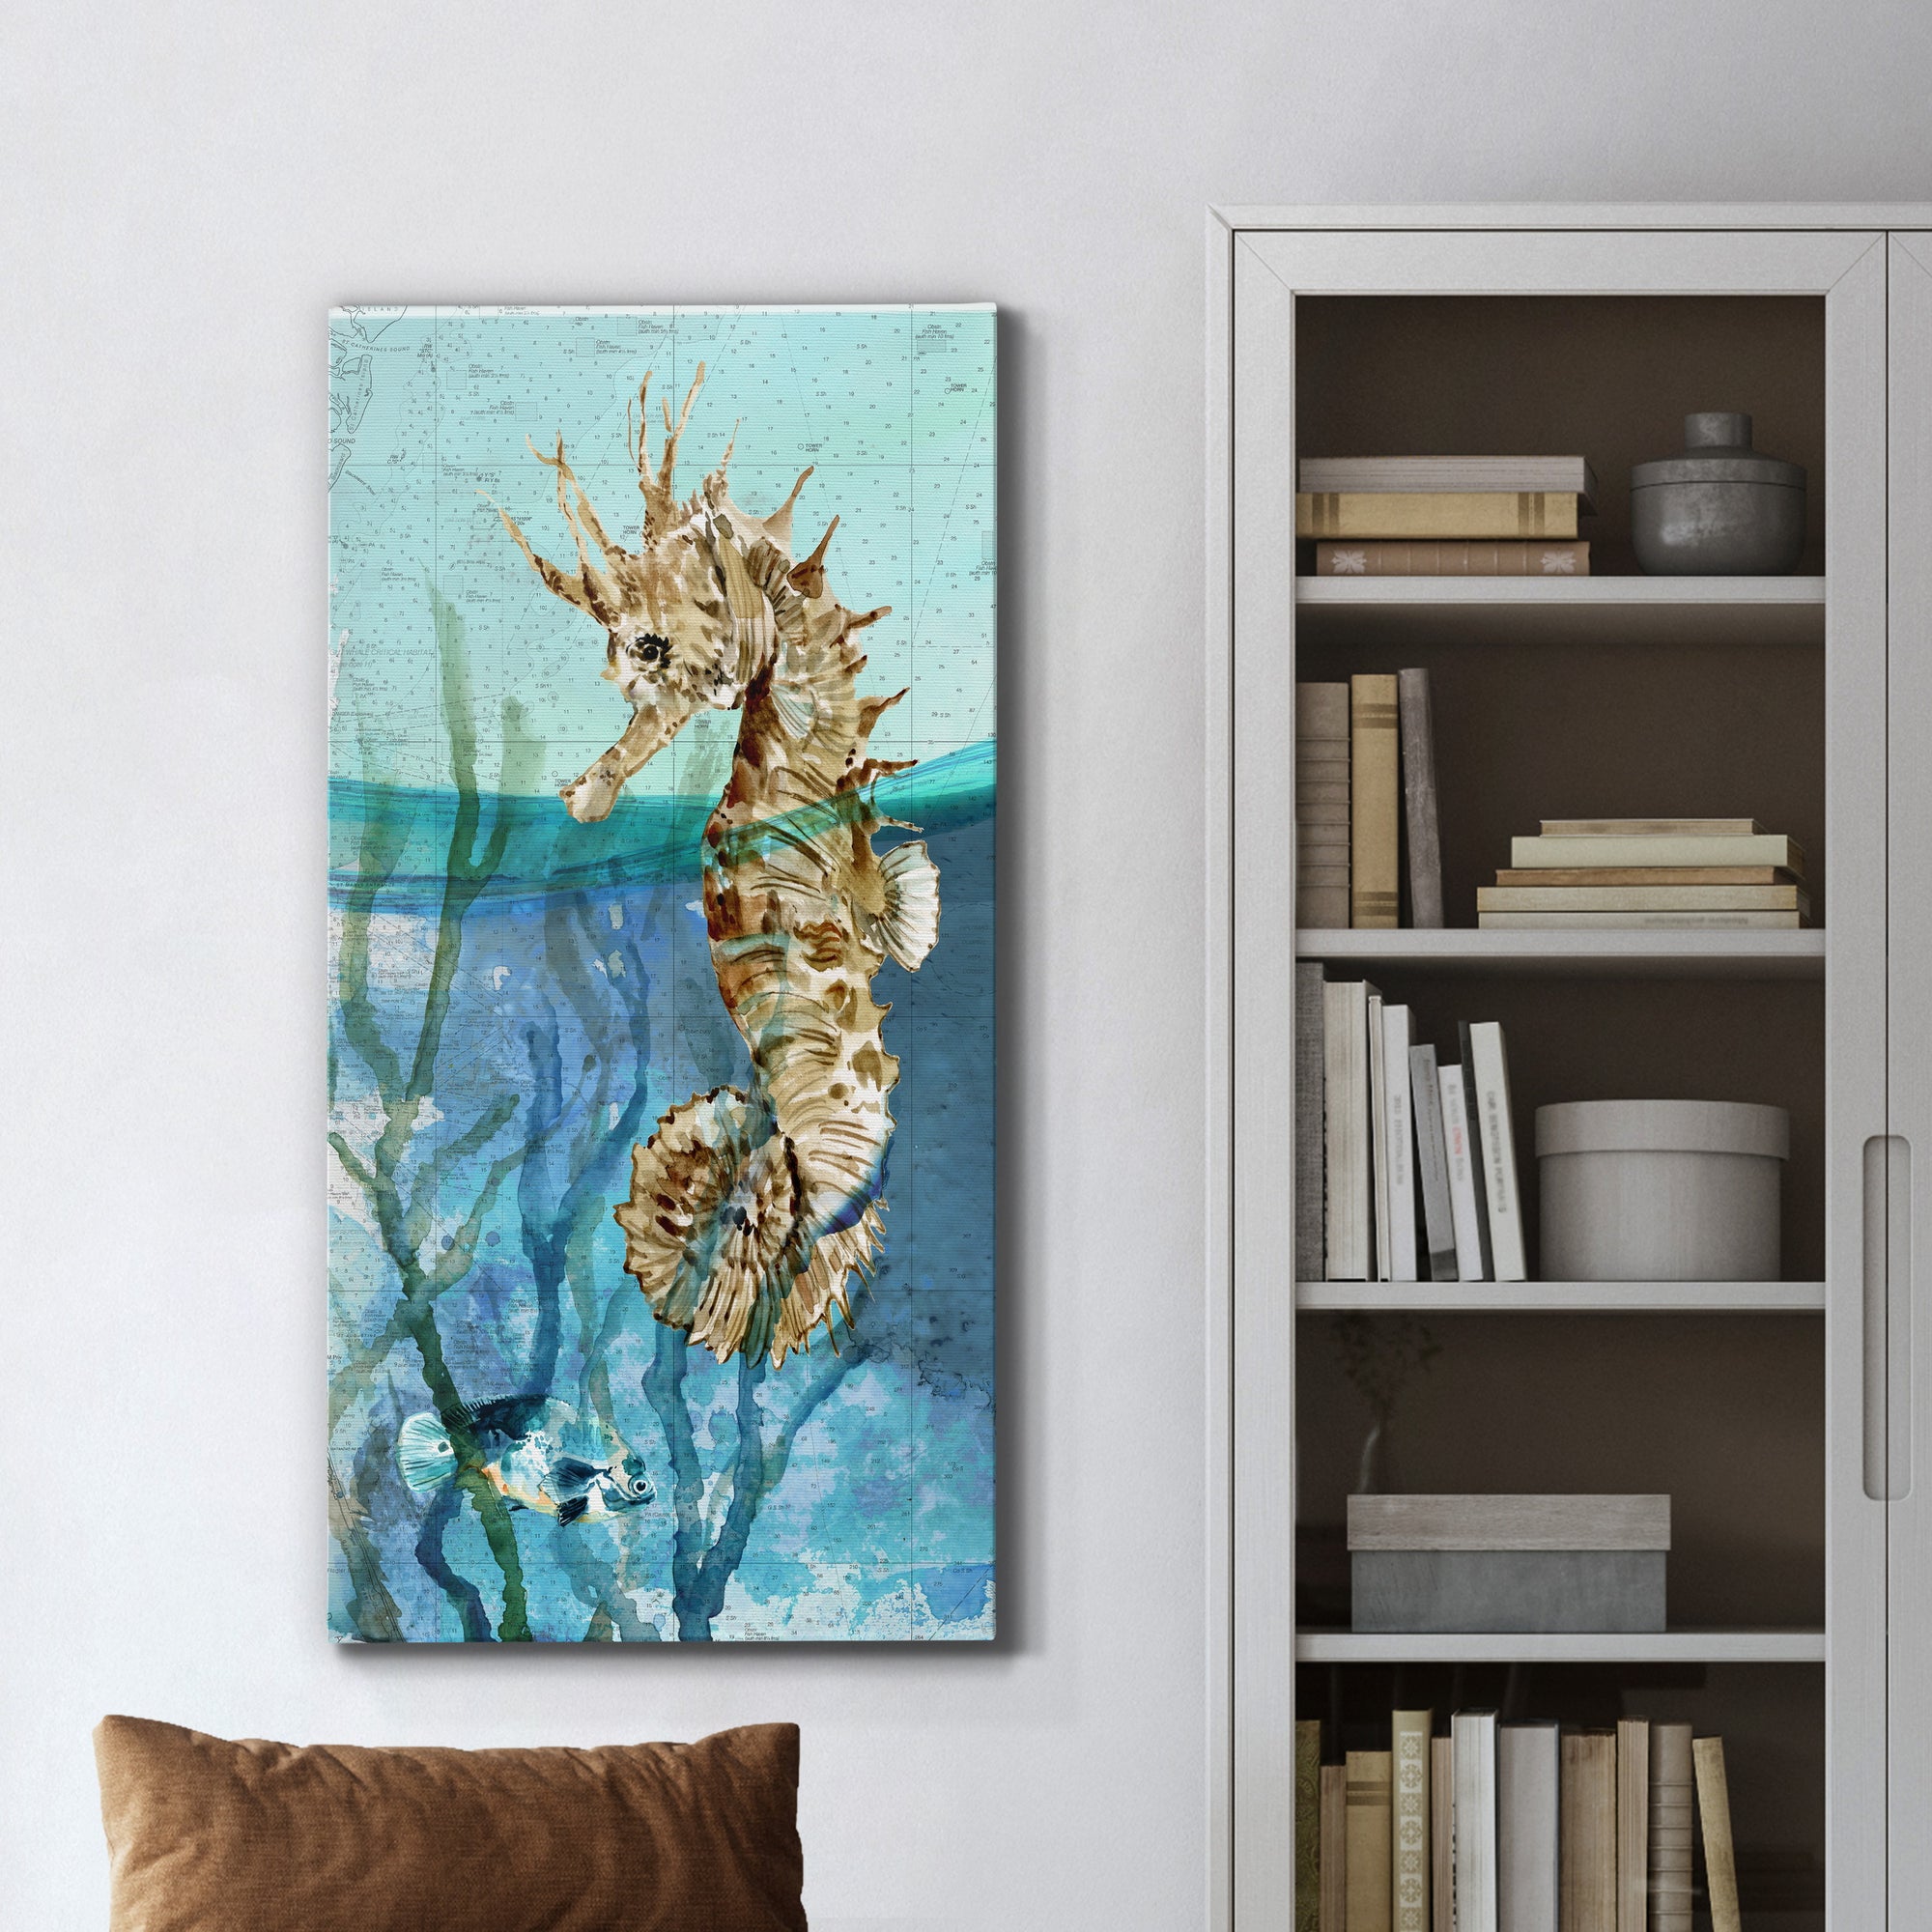 Pacific Seahorse - Premium Gallery Wrapped Canvas - Ready to Hang